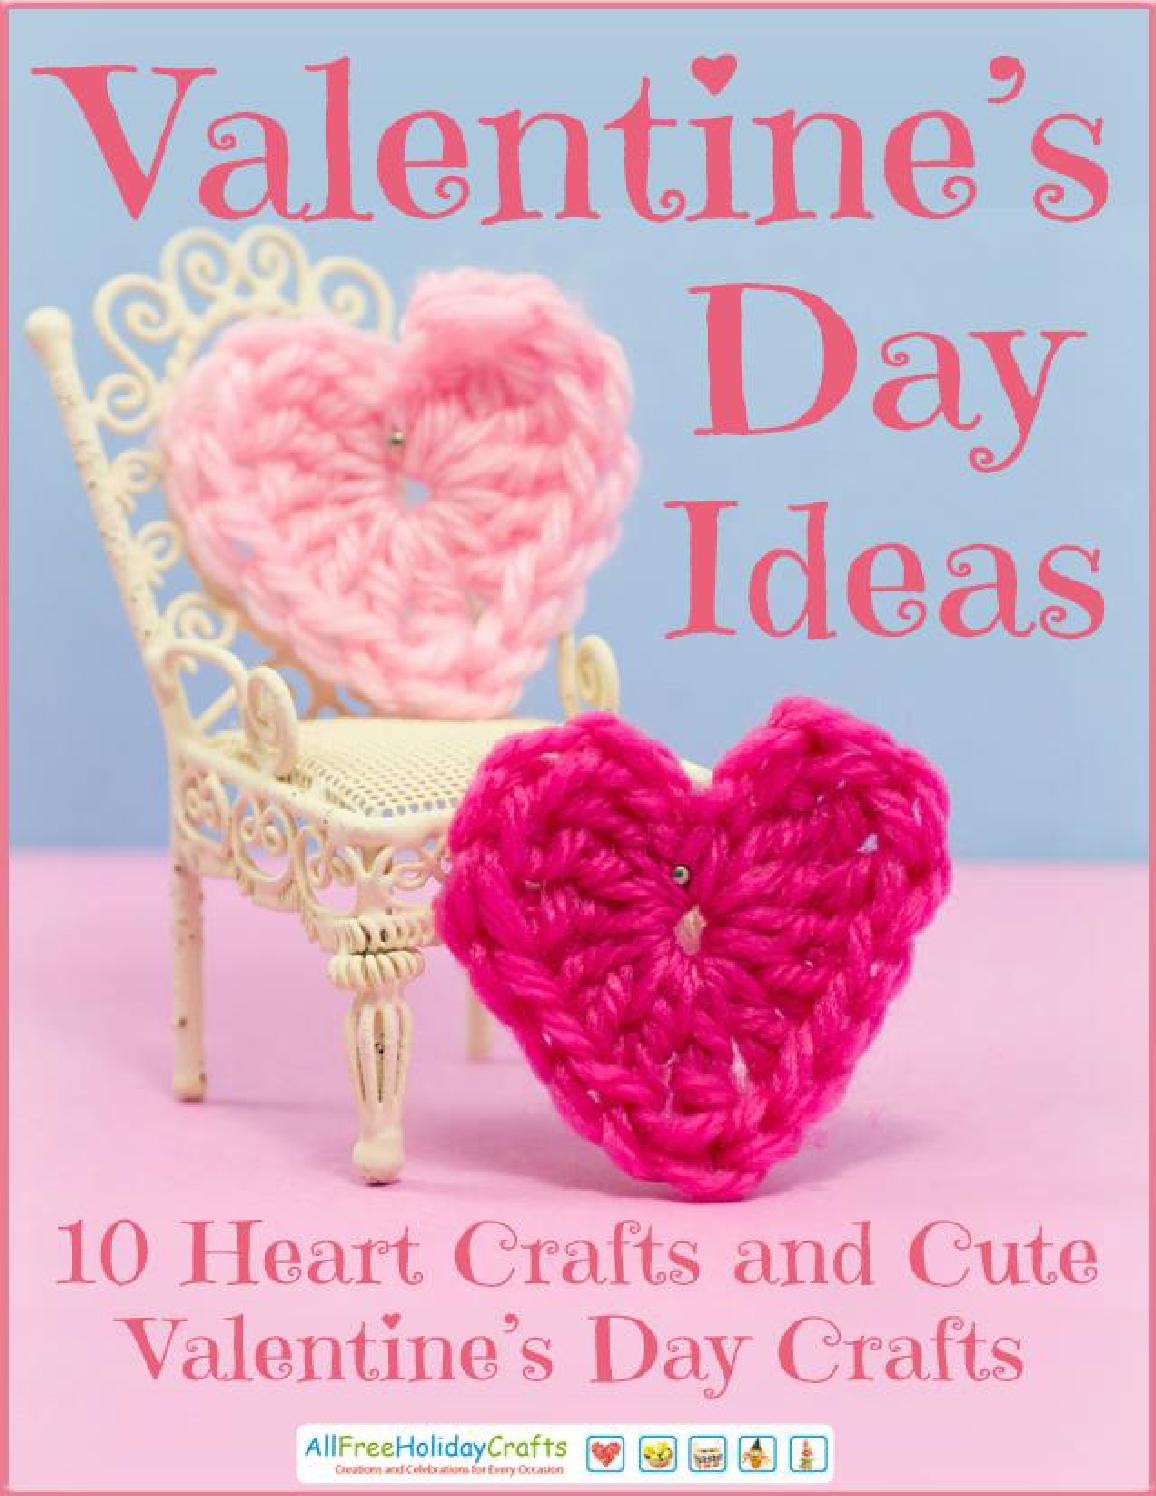 Valentines Day Date Ideas
 Valentines day ideas heart crafts and cute valentines day